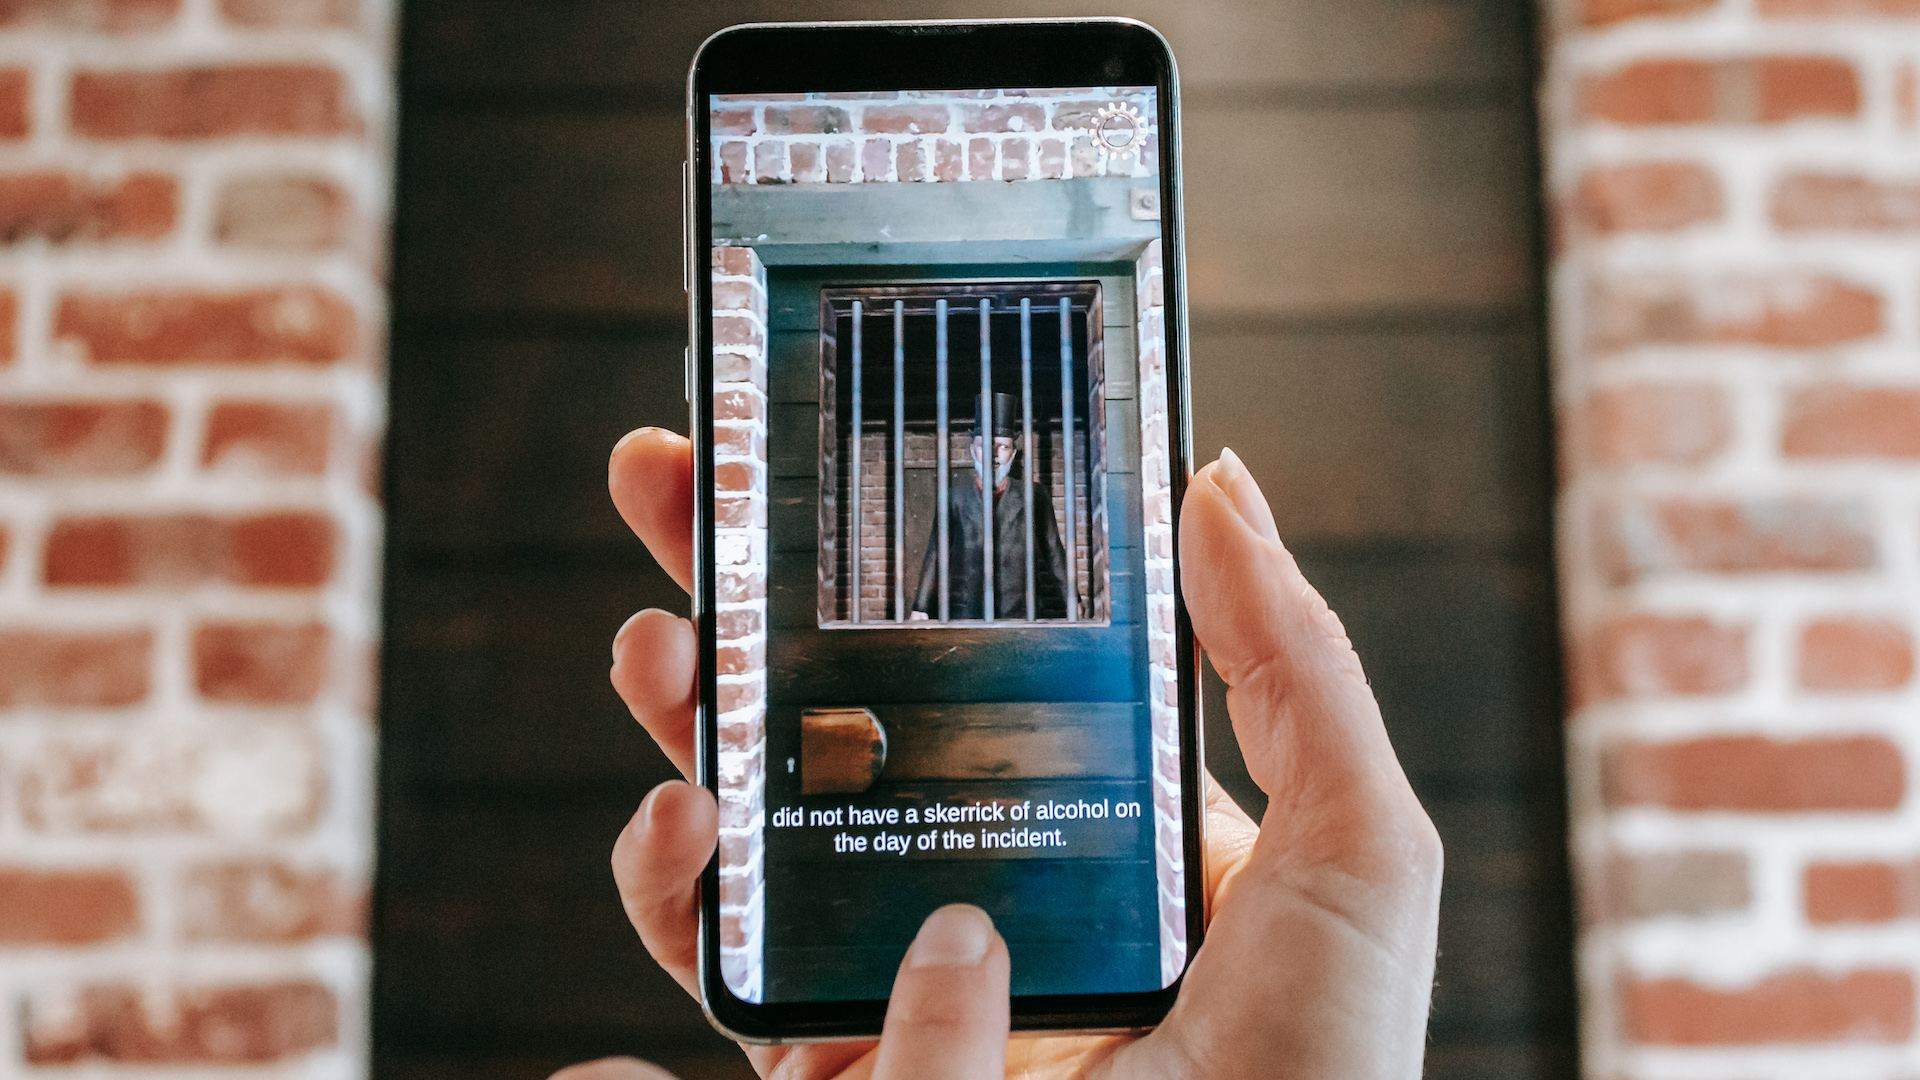 Eastern Market Murder is Melbourne's New Augmented Reality Smartphone Game Based on a True Crime